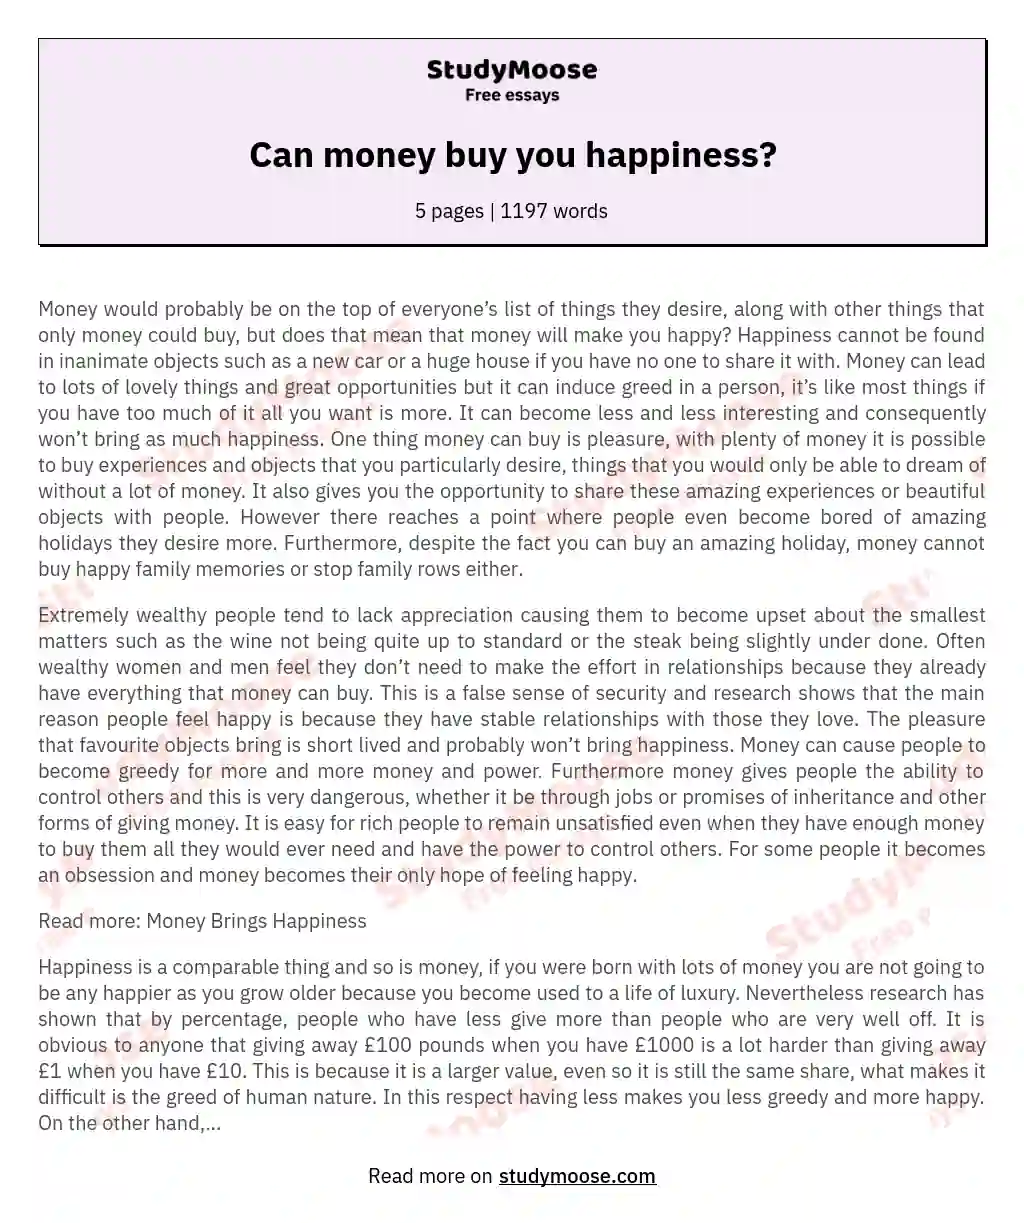 Can money buy you happiness? essay